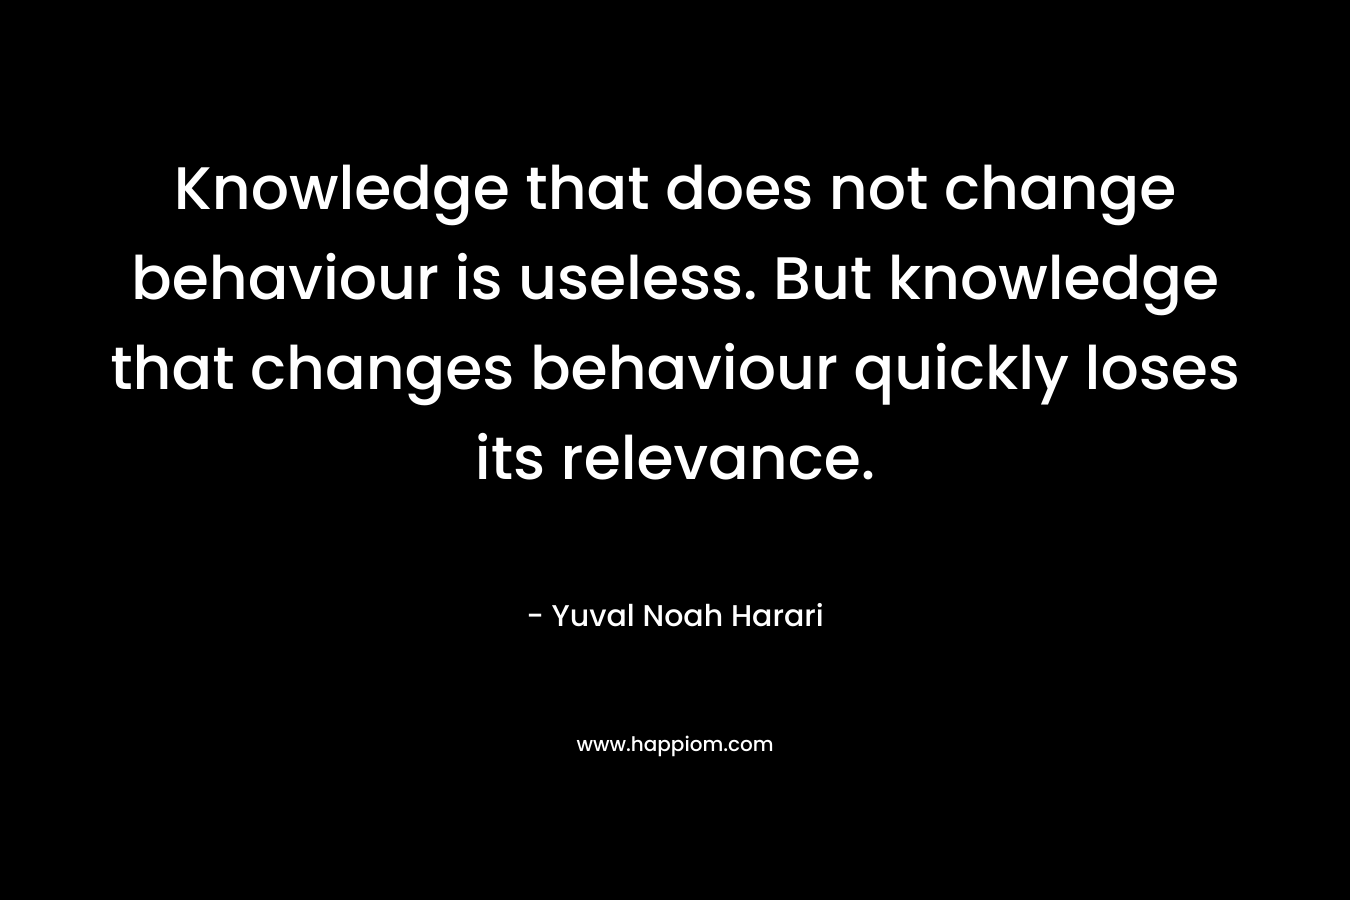 Knowledge that does not change behaviour is useless. But knowledge that changes behaviour quickly loses its relevance. – Yuval Noah Harari